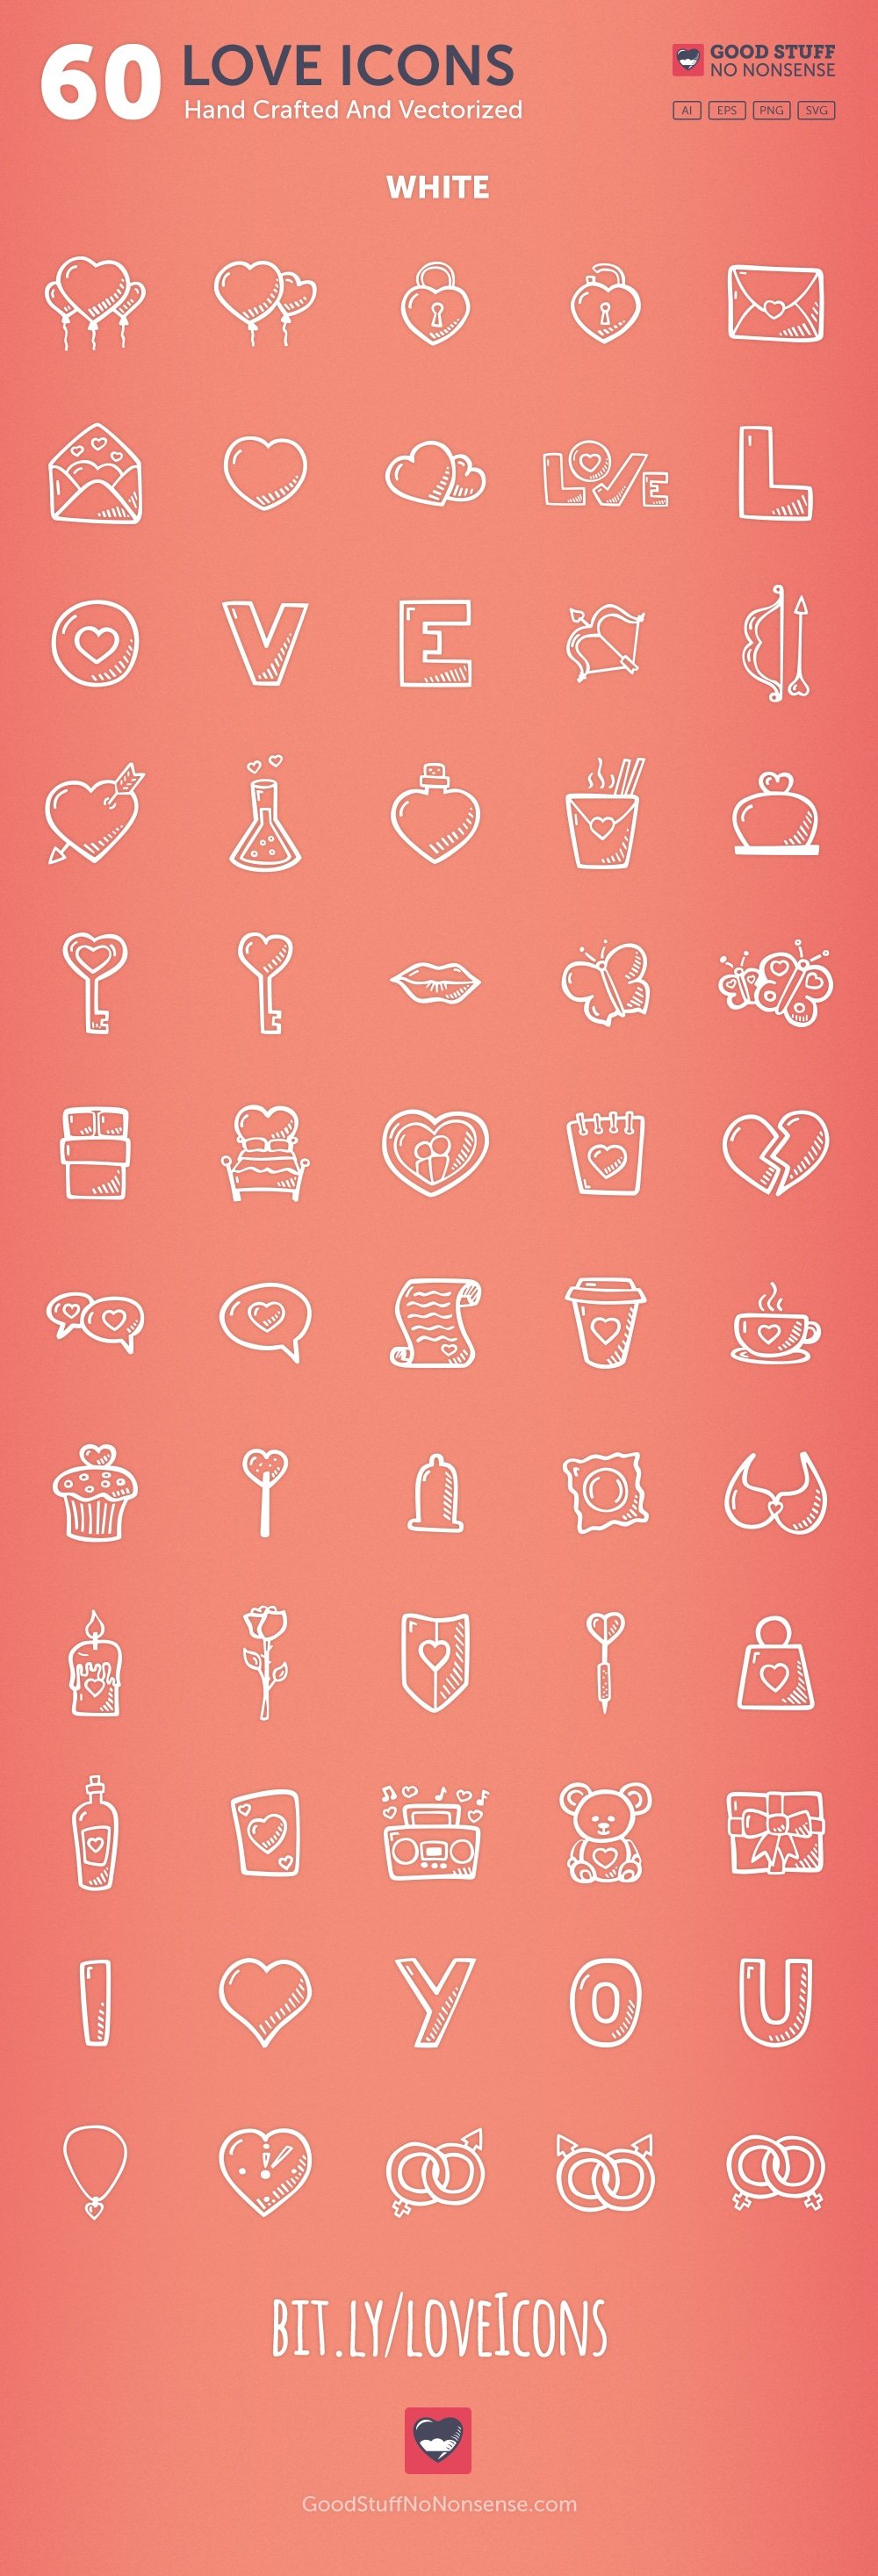 A set of 60 different white hand drawn icons on a pink background.